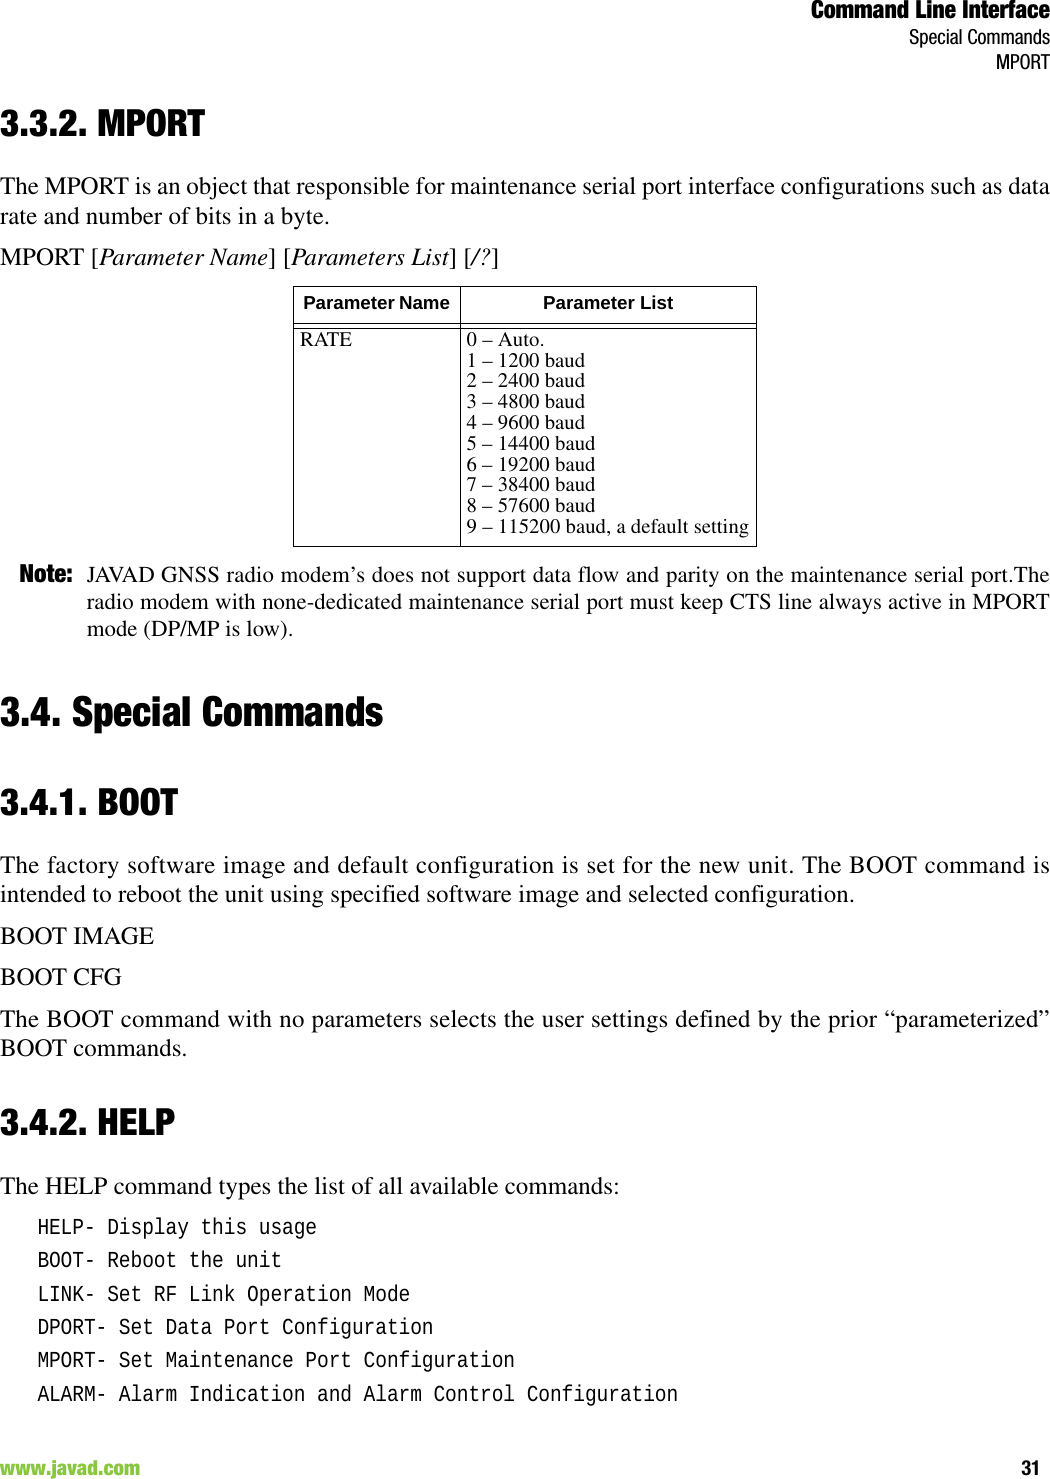 Command Line InterfaceSpecial CommandsMPORT31www.javad.com                                                                                                                                                        3.3.2. MPORTThe MPORT is an object that responsible for maintenance serial port interface configurations such as datarate and number of bits in a byte.MPORT [Parameter Name] [Parameters List] [/?]Note: JAVAD GNSS radio modem’s does not support data flow and parity on the maintenance serial port.Theradio modem with none-dedicated maintenance serial port must keep CTS line always active in MPORTmode (DP/MP is low).3.4. Special Commands3.4.1. BOOTThe factory software image and default configuration is set for the new unit. The BOOT command isintended to reboot the unit using specified software image and selected configuration. BOOT IMAGEBOOT CFGThe BOOT command with no parameters selects the user settings defined by the prior “parameterized”BOOT commands.3.4.2. HELPThe HELP command types the list of all available commands:HELP- Display this usageBOOT- Reboot the unitLINK- Set RF Link Operation ModeDPORT- Set Data Port ConfigurationMPORT- Set Maintenance Port ConfigurationALARM- Alarm Indication and Alarm Control ConfigurationParameter Name  Parameter ListRATE 0 – Auto.1 – 1200 baud2 – 2400 baud3 – 4800 baud4 – 9600 baud5 – 14400 baud6 – 19200 baud7 – 38400 baud8 – 57600 baud9 – 115200 baud, a default setting